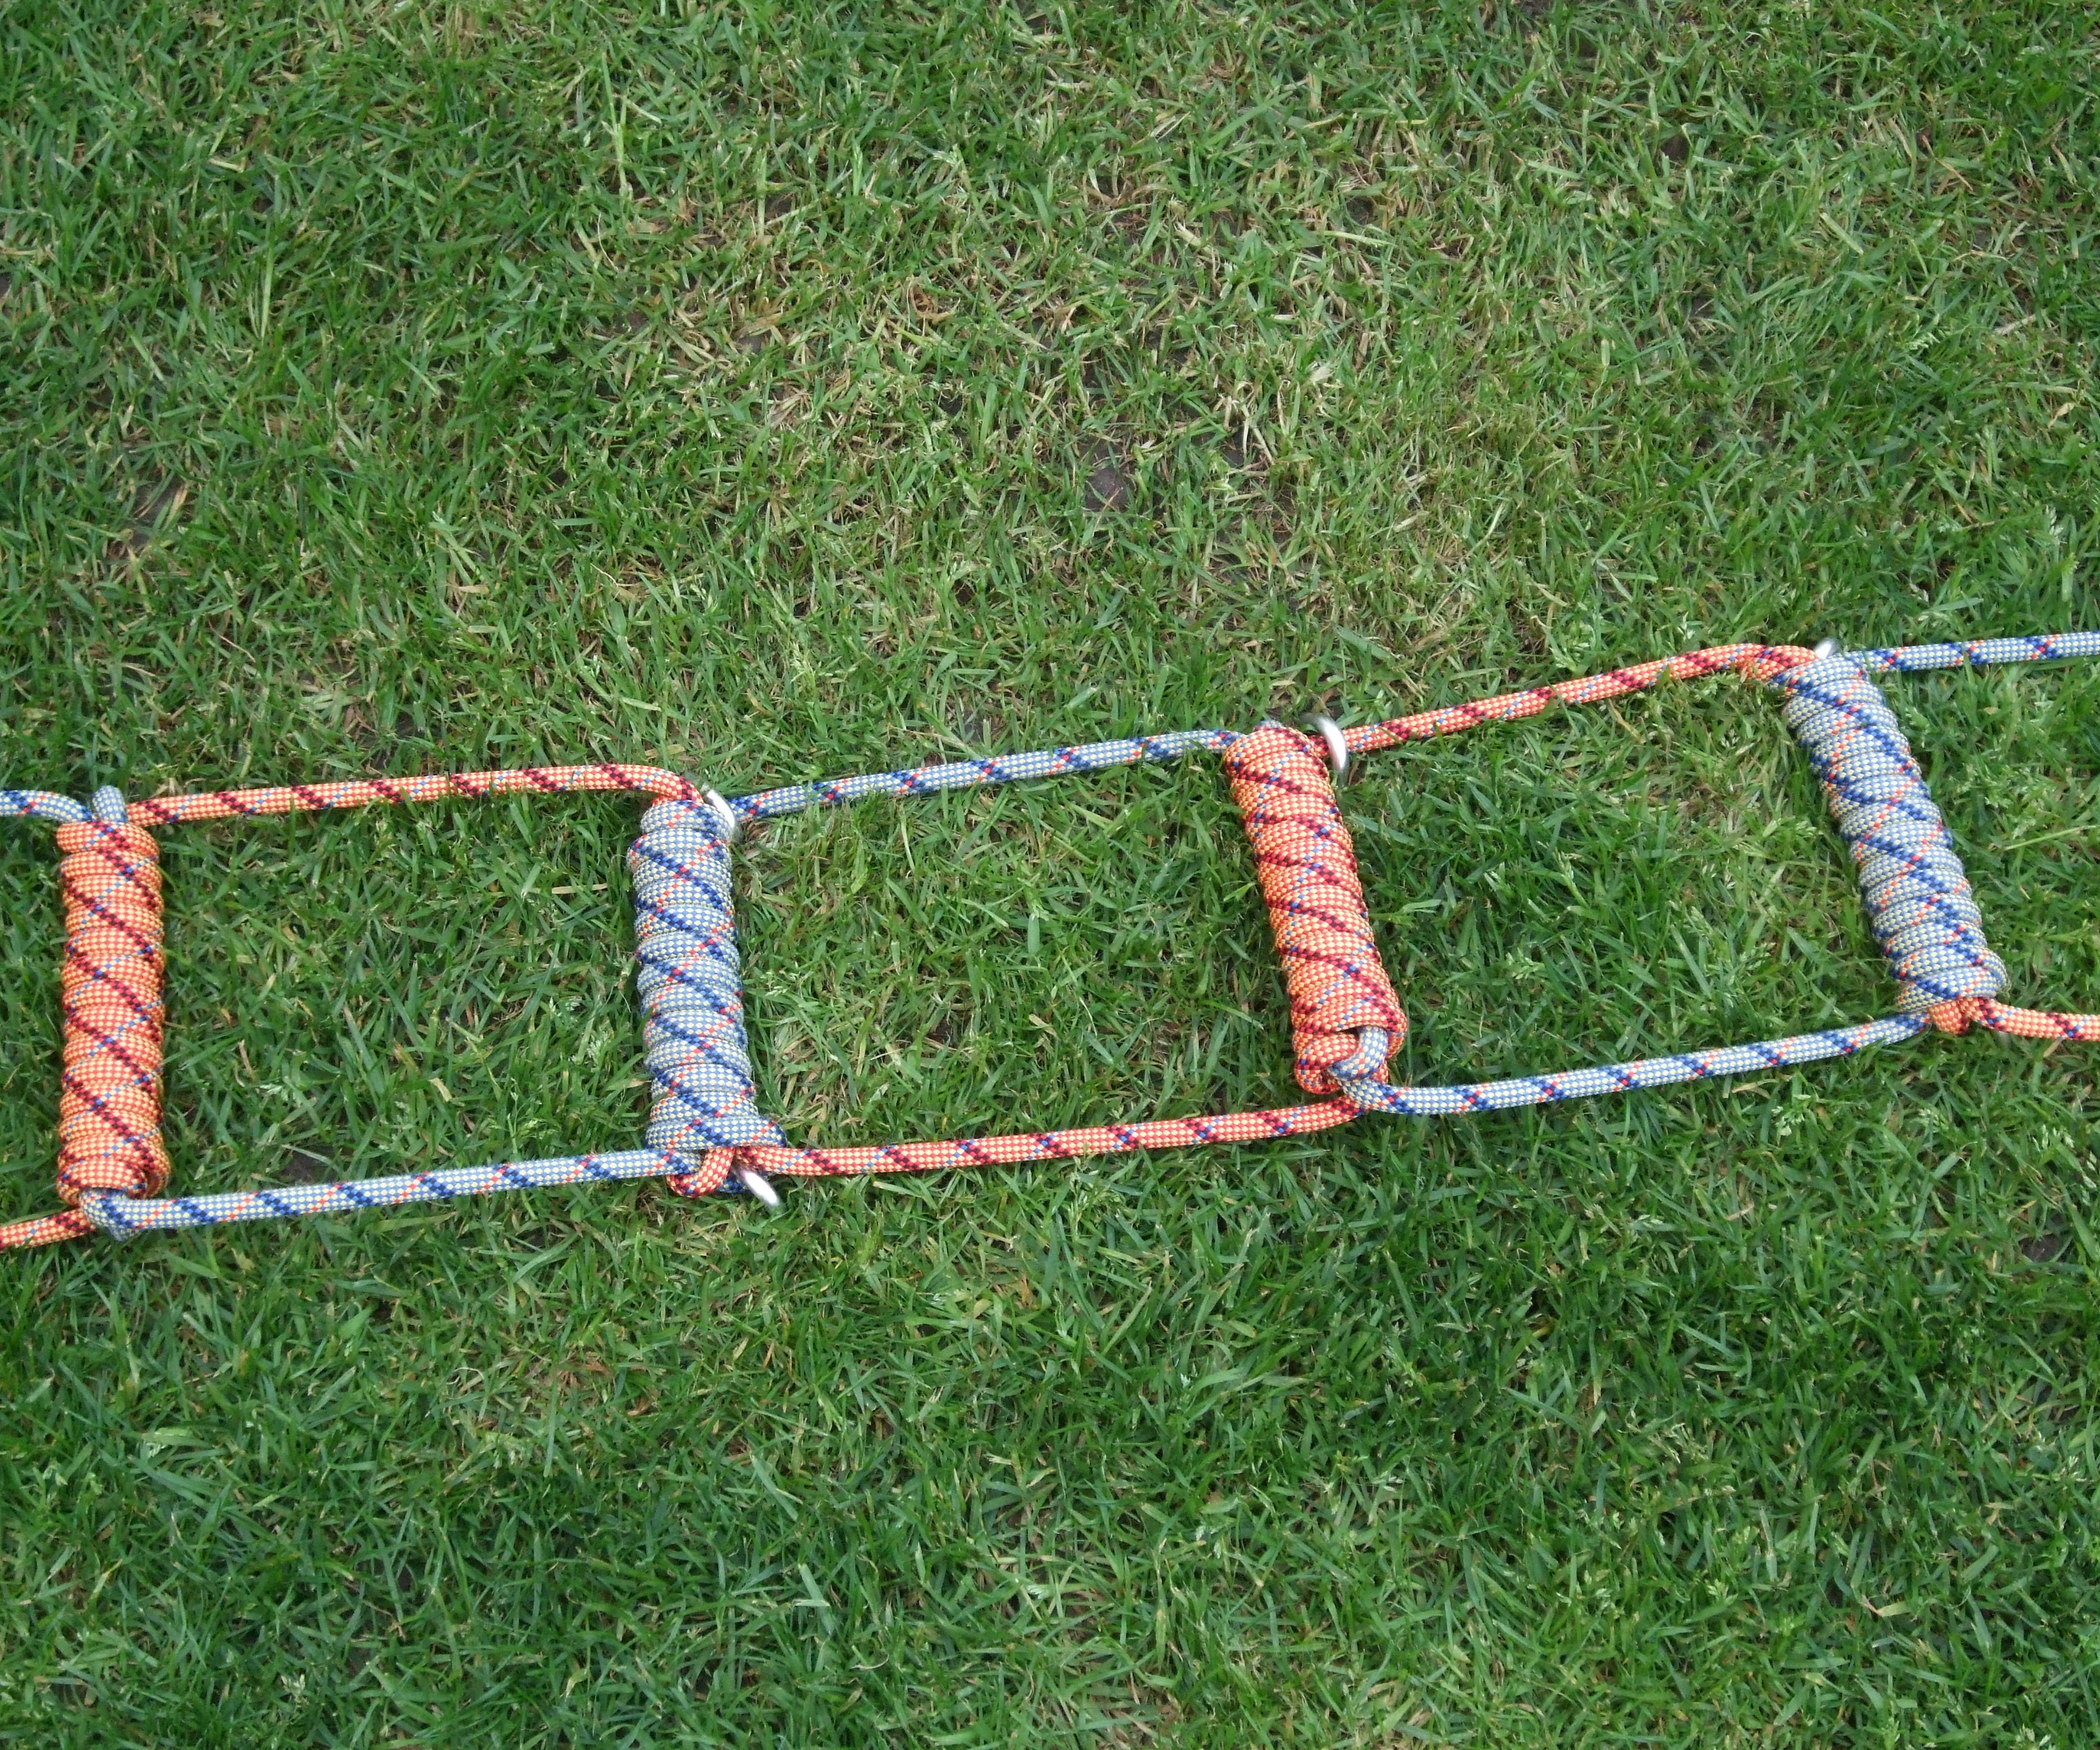 Rope Ladder Pics, Man Made Collection